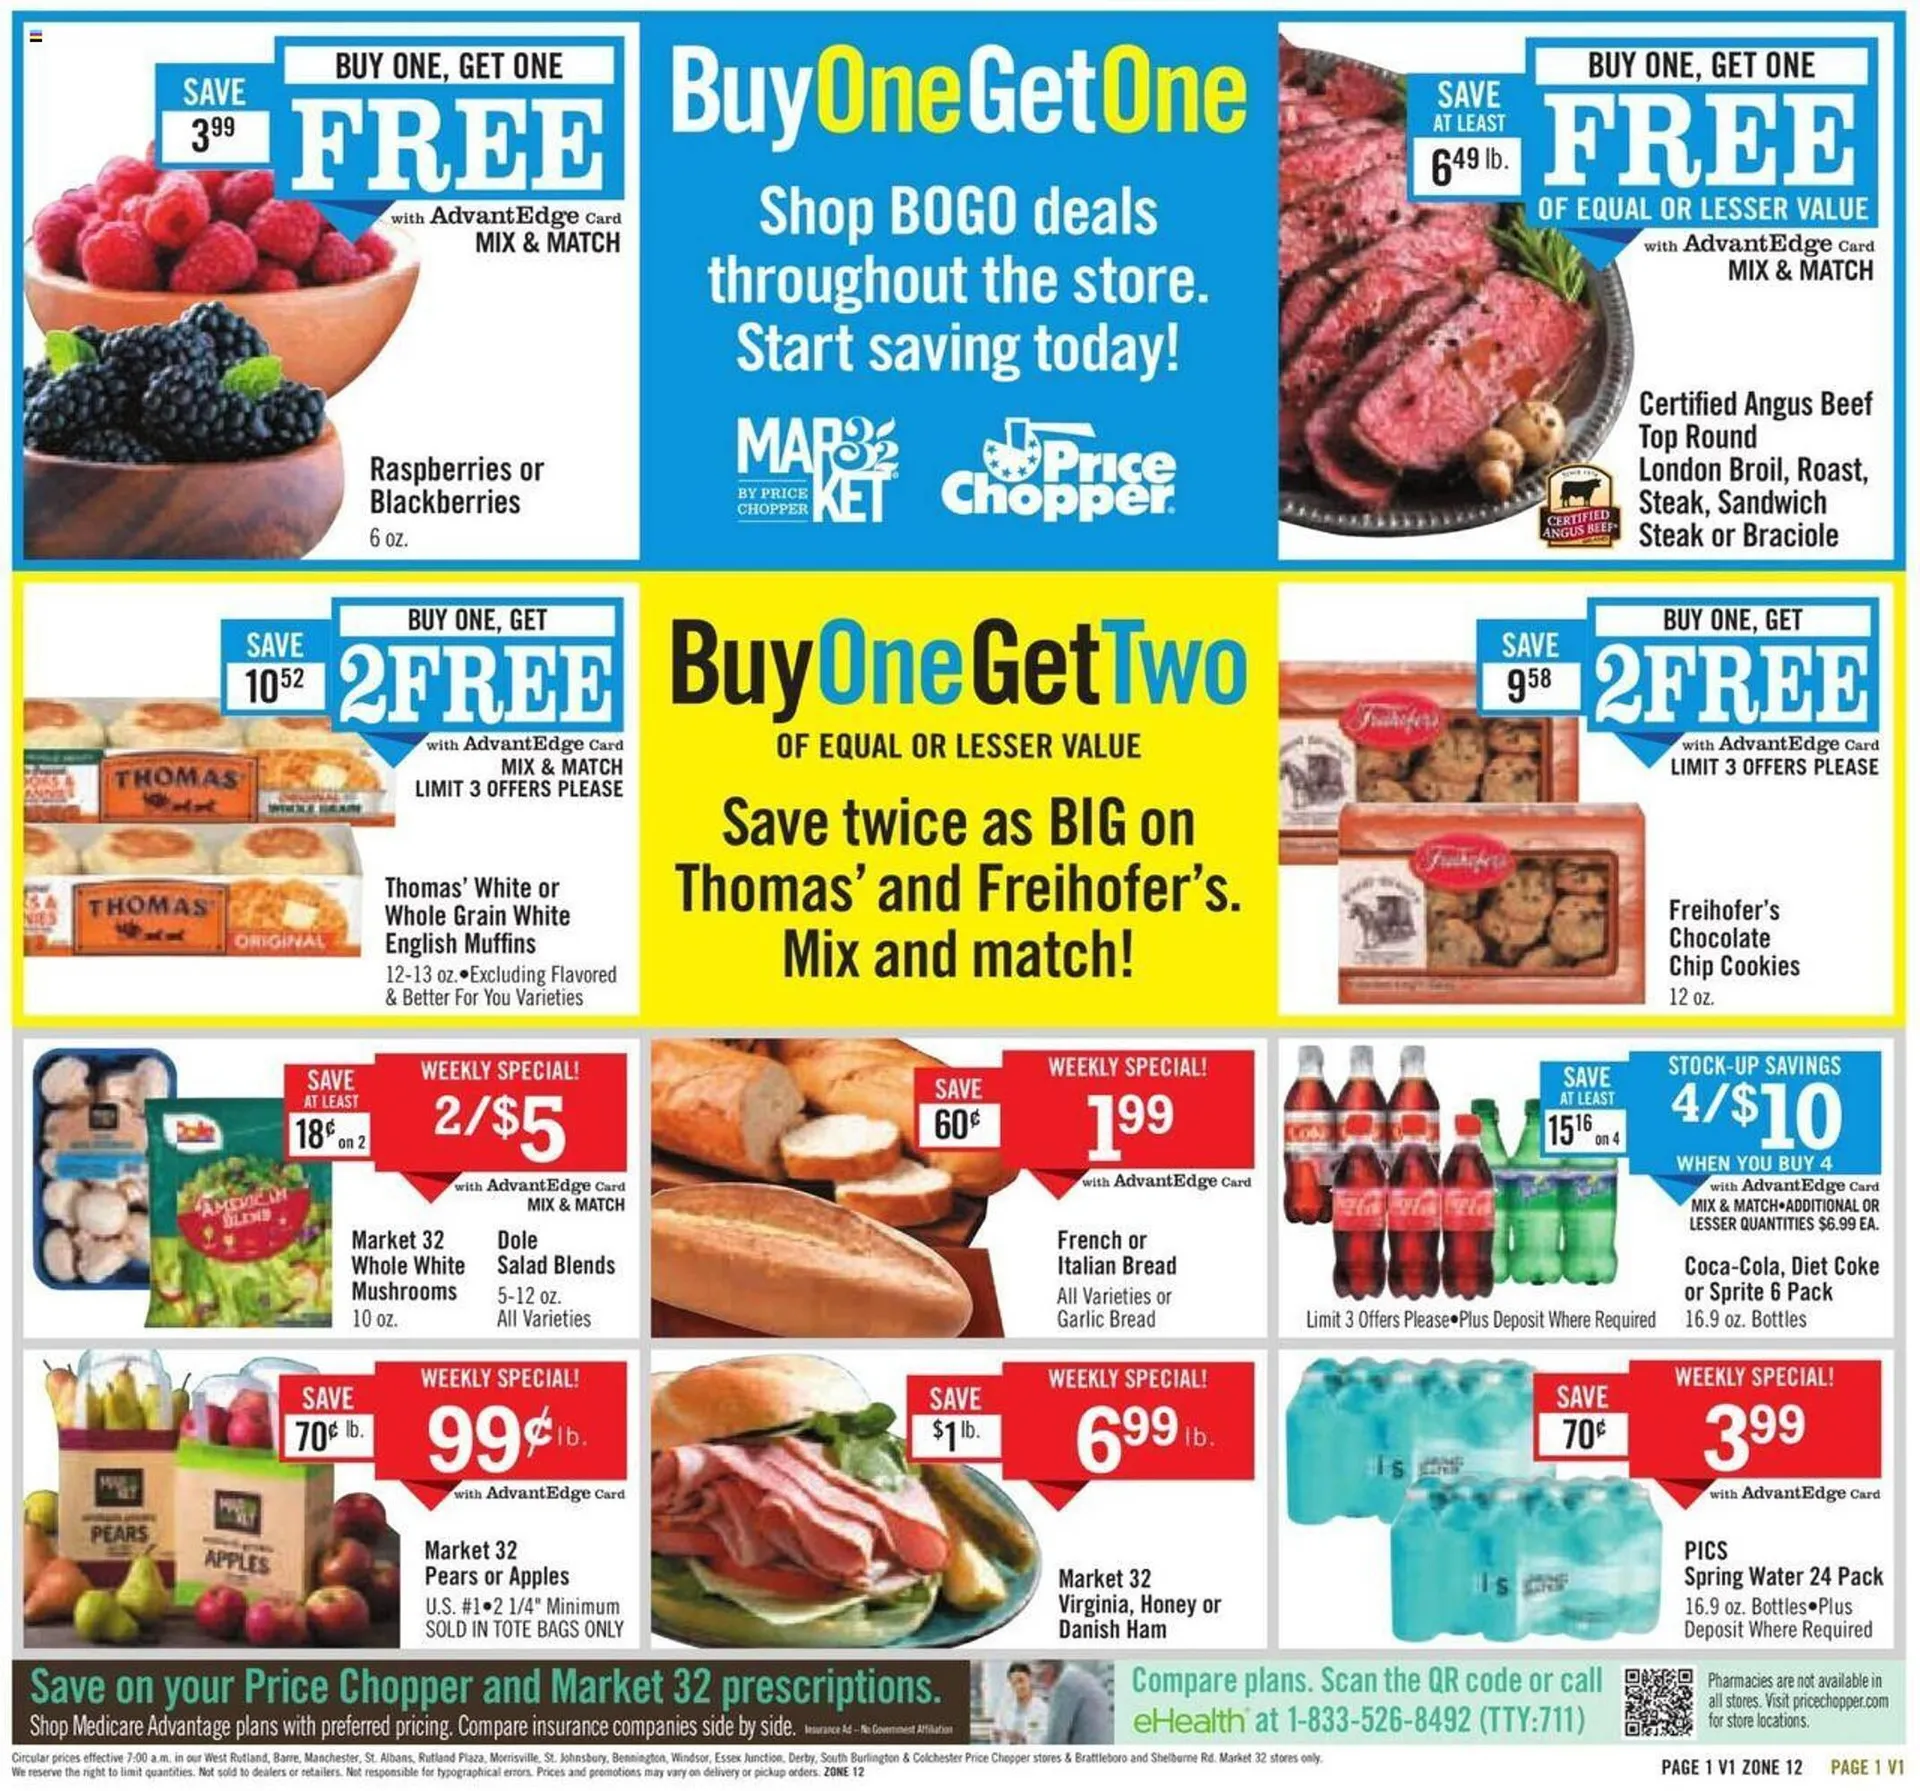 Price Chopper Weekly Ad - 1